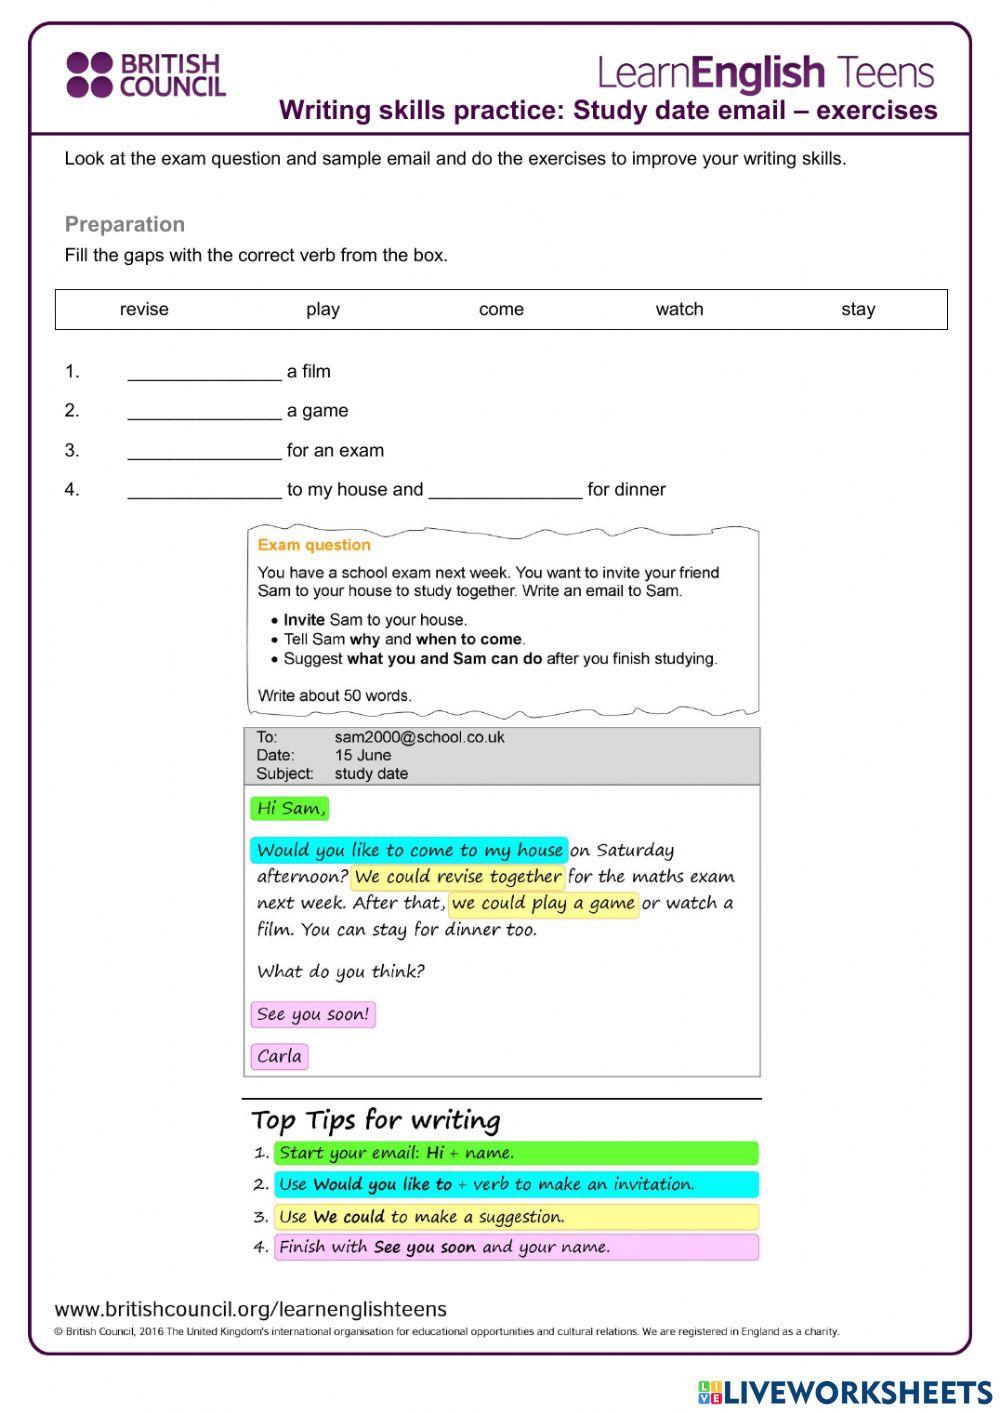 WRITING AN EMAIL (FORM 1)